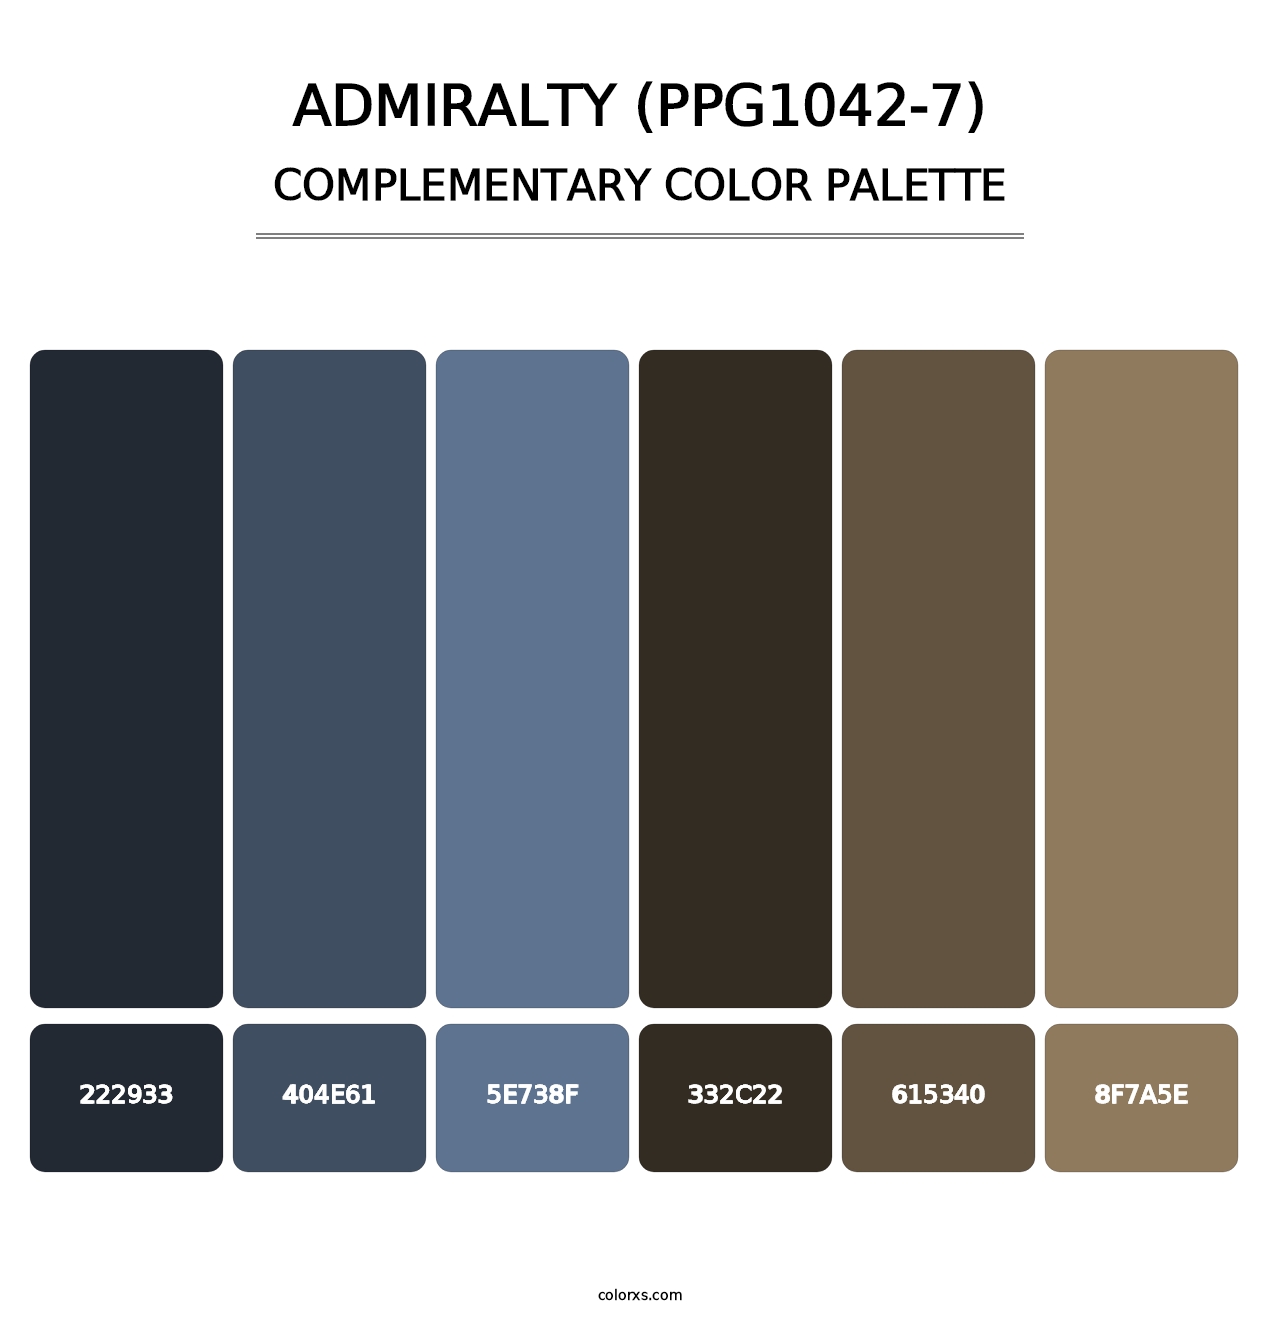 Admiralty (PPG1042-7) - Complementary Color Palette